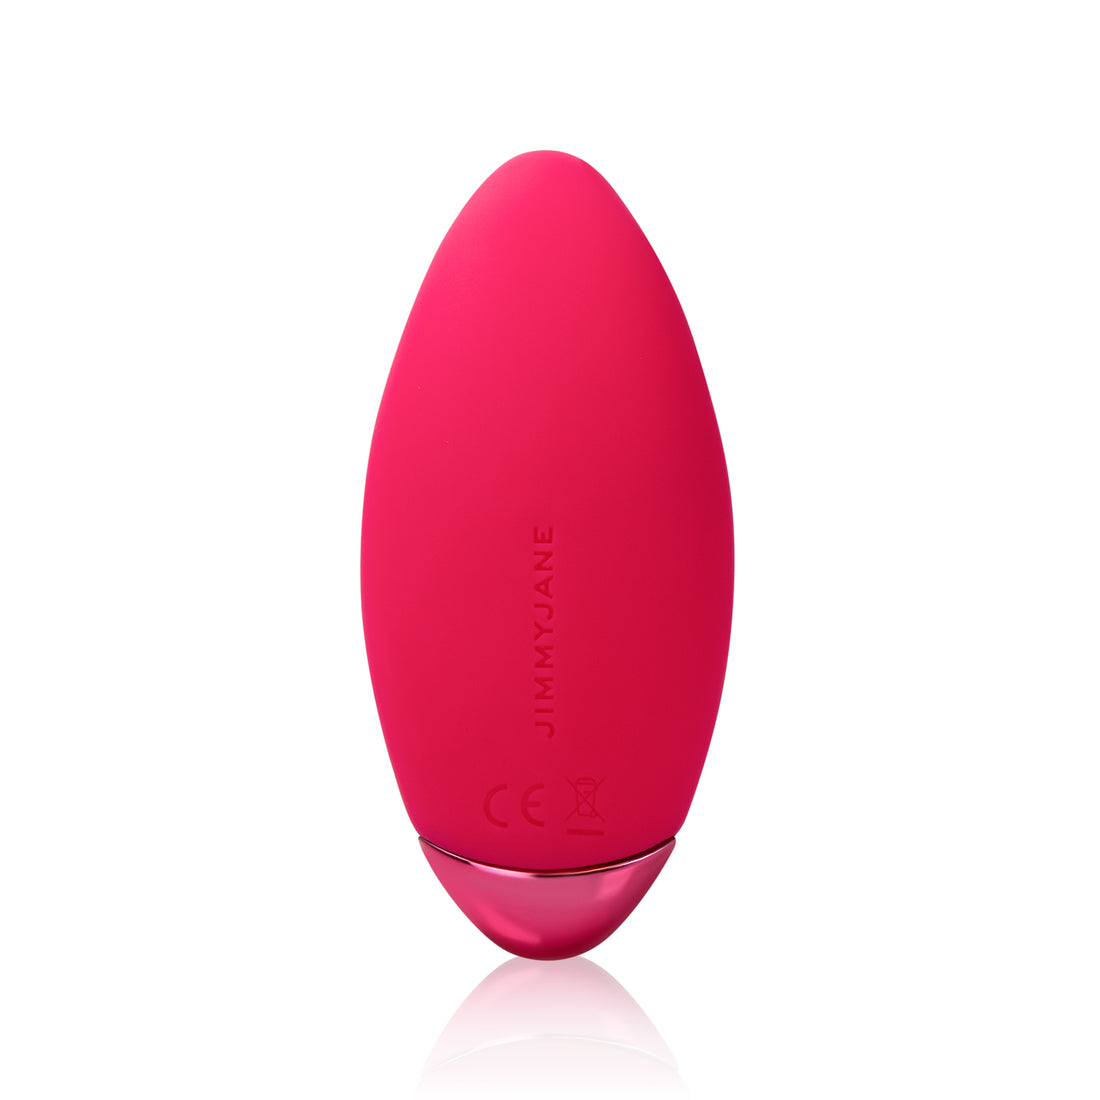 the back of the curved small vibrator Form 3 pink by JimmyJane #pink